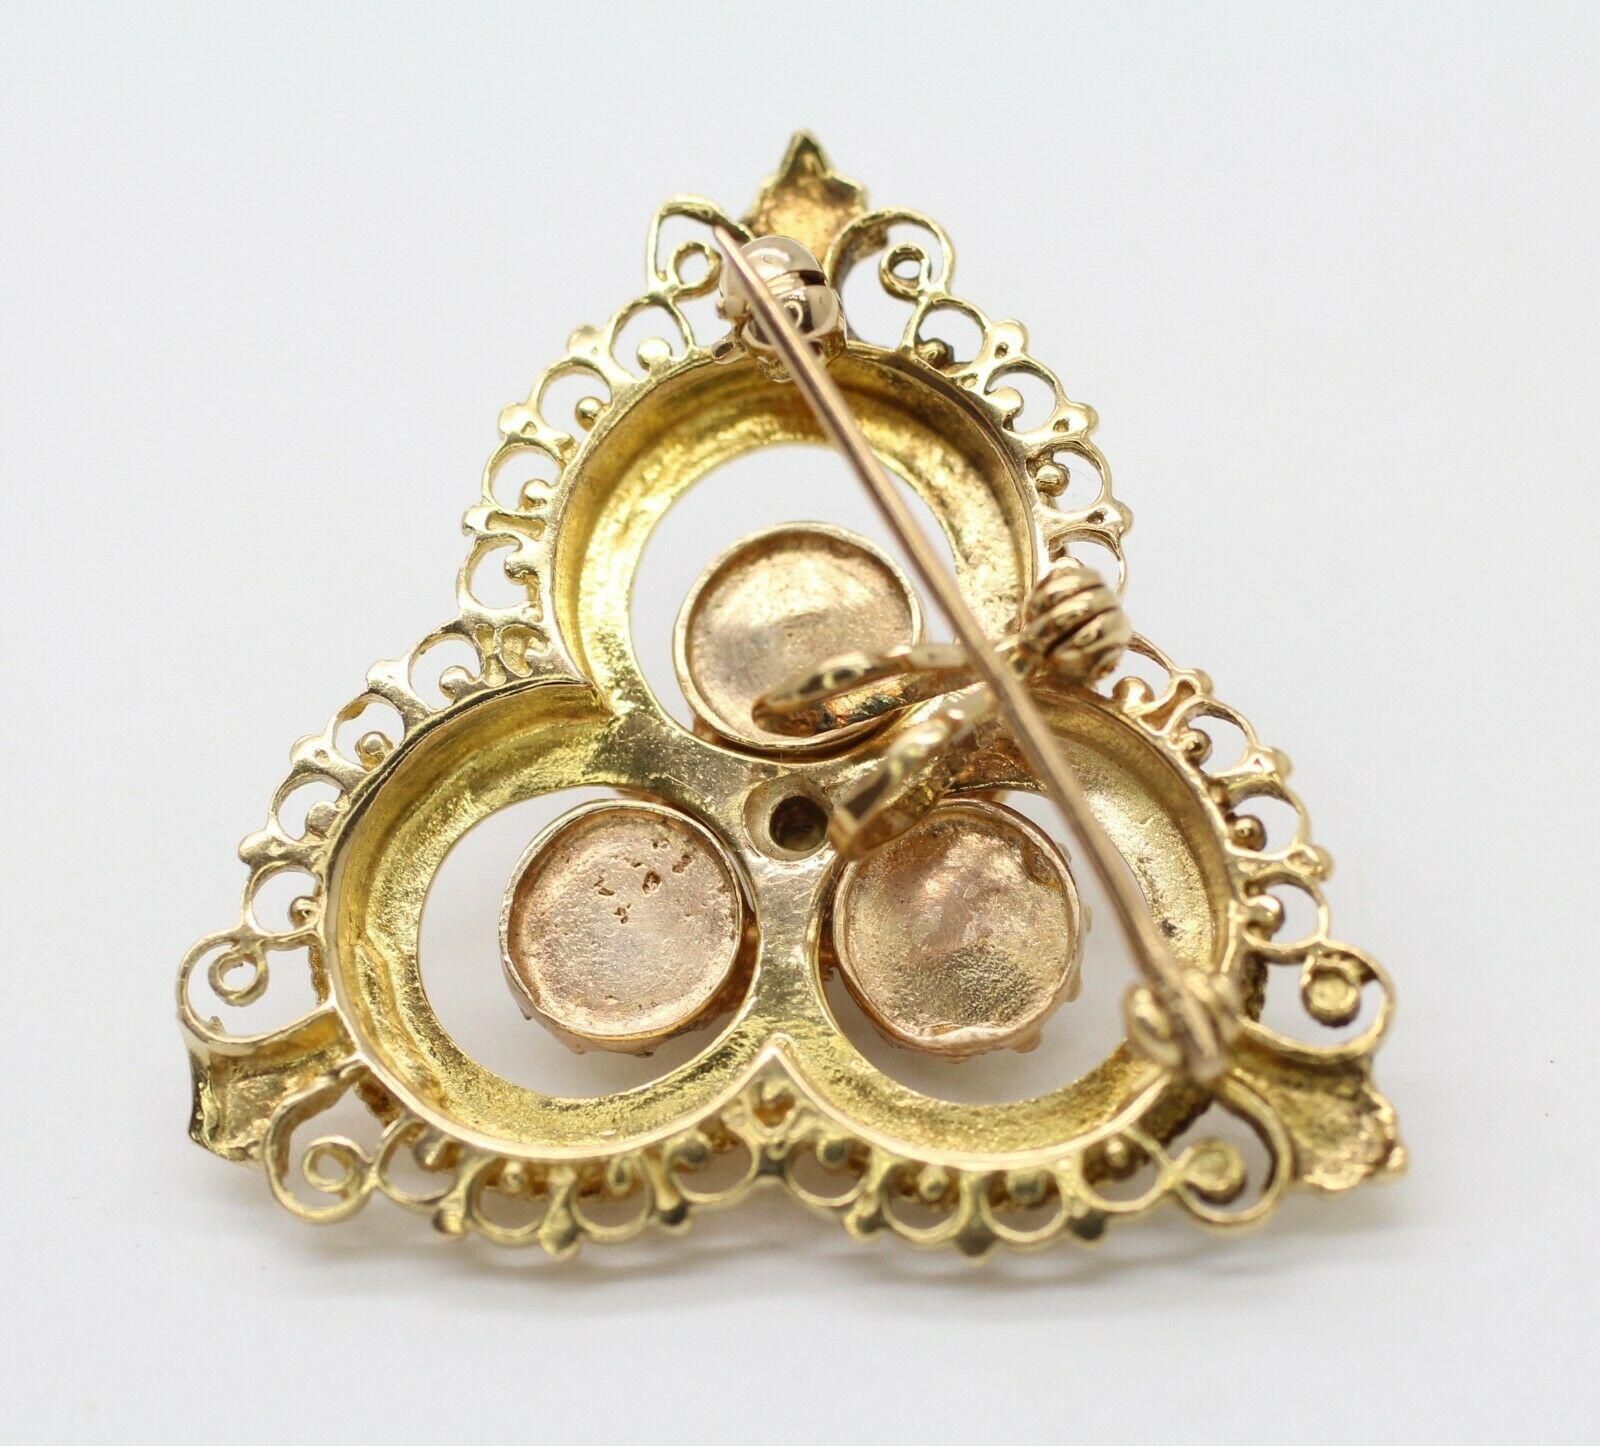 Artisan This Antique 14 Karat Yellow Gold Brooch with Pearls and Diamonds in the Center